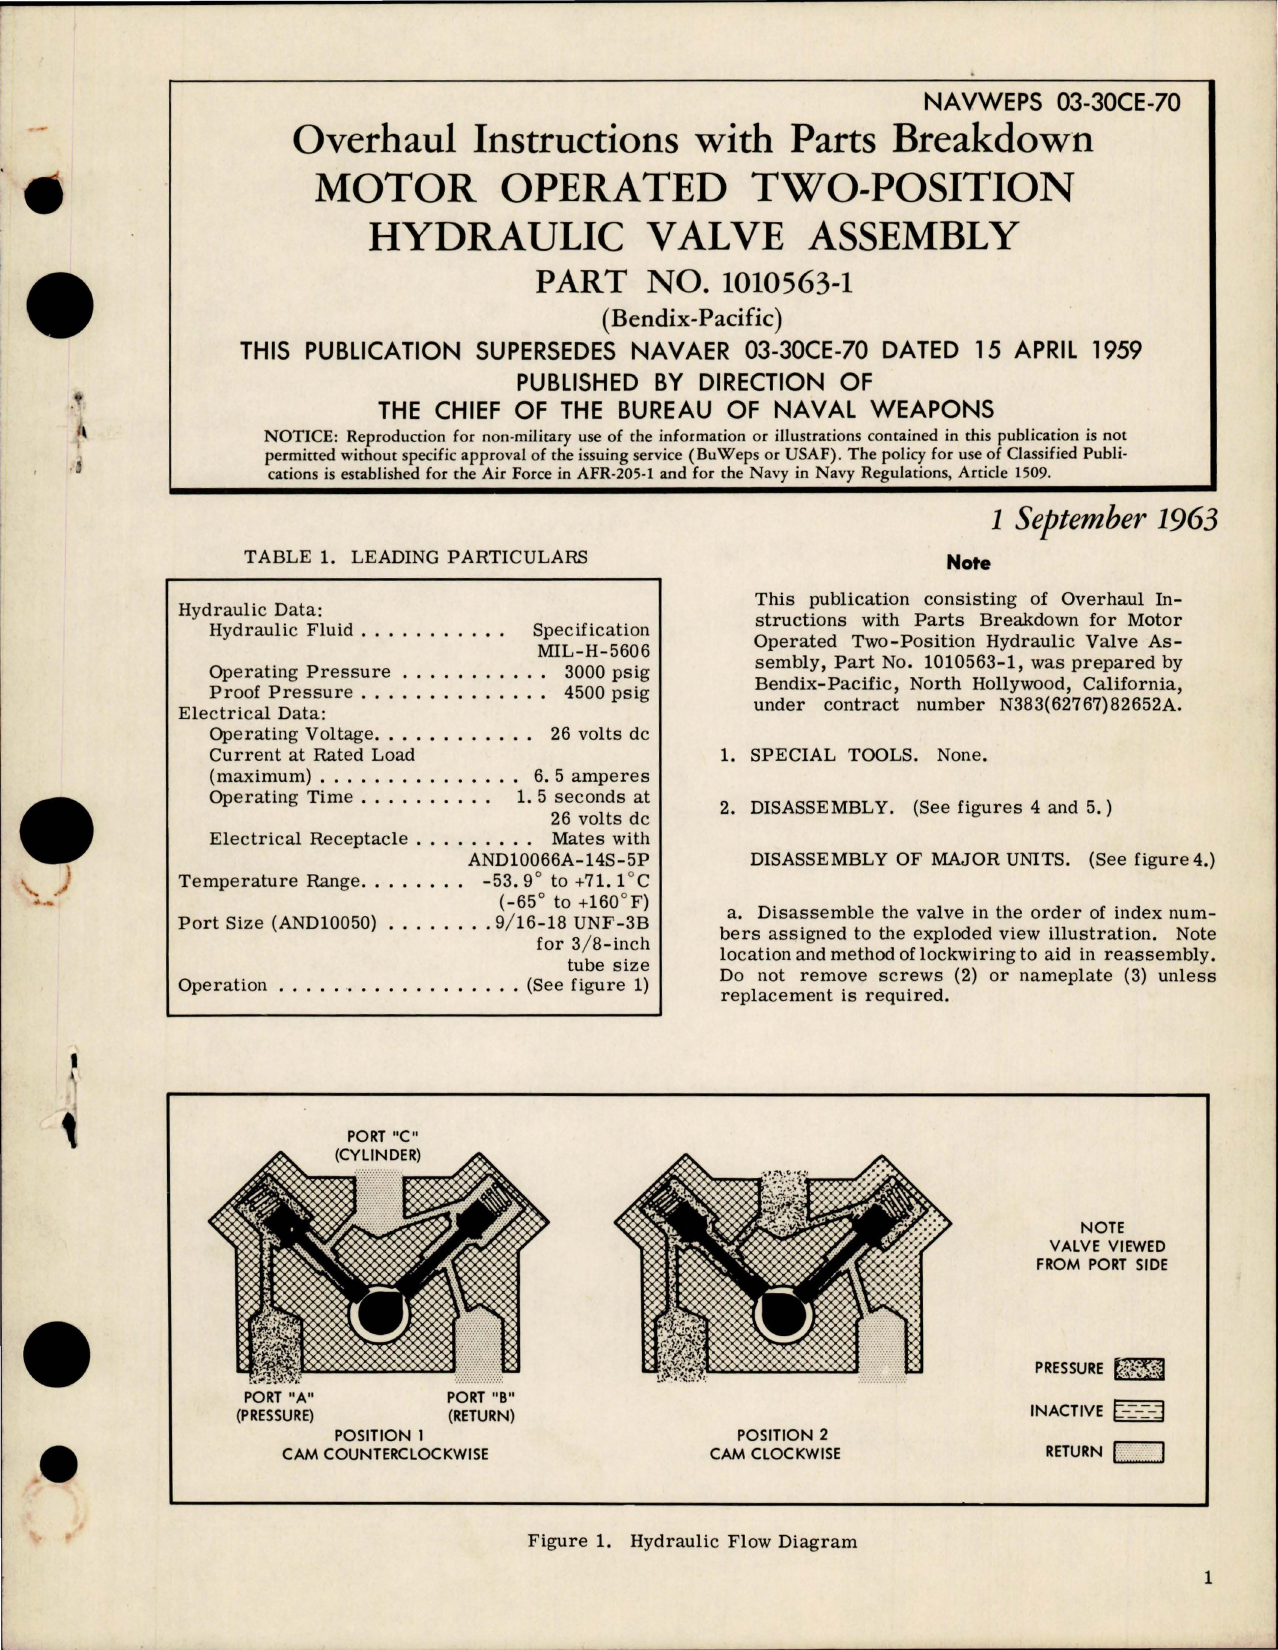 Sample page 1 from AirCorps Library document: Overhaul Instructions with Parts for Motor Operated Two-Position Hydraulic Valve Assembly - Part 1010563-1